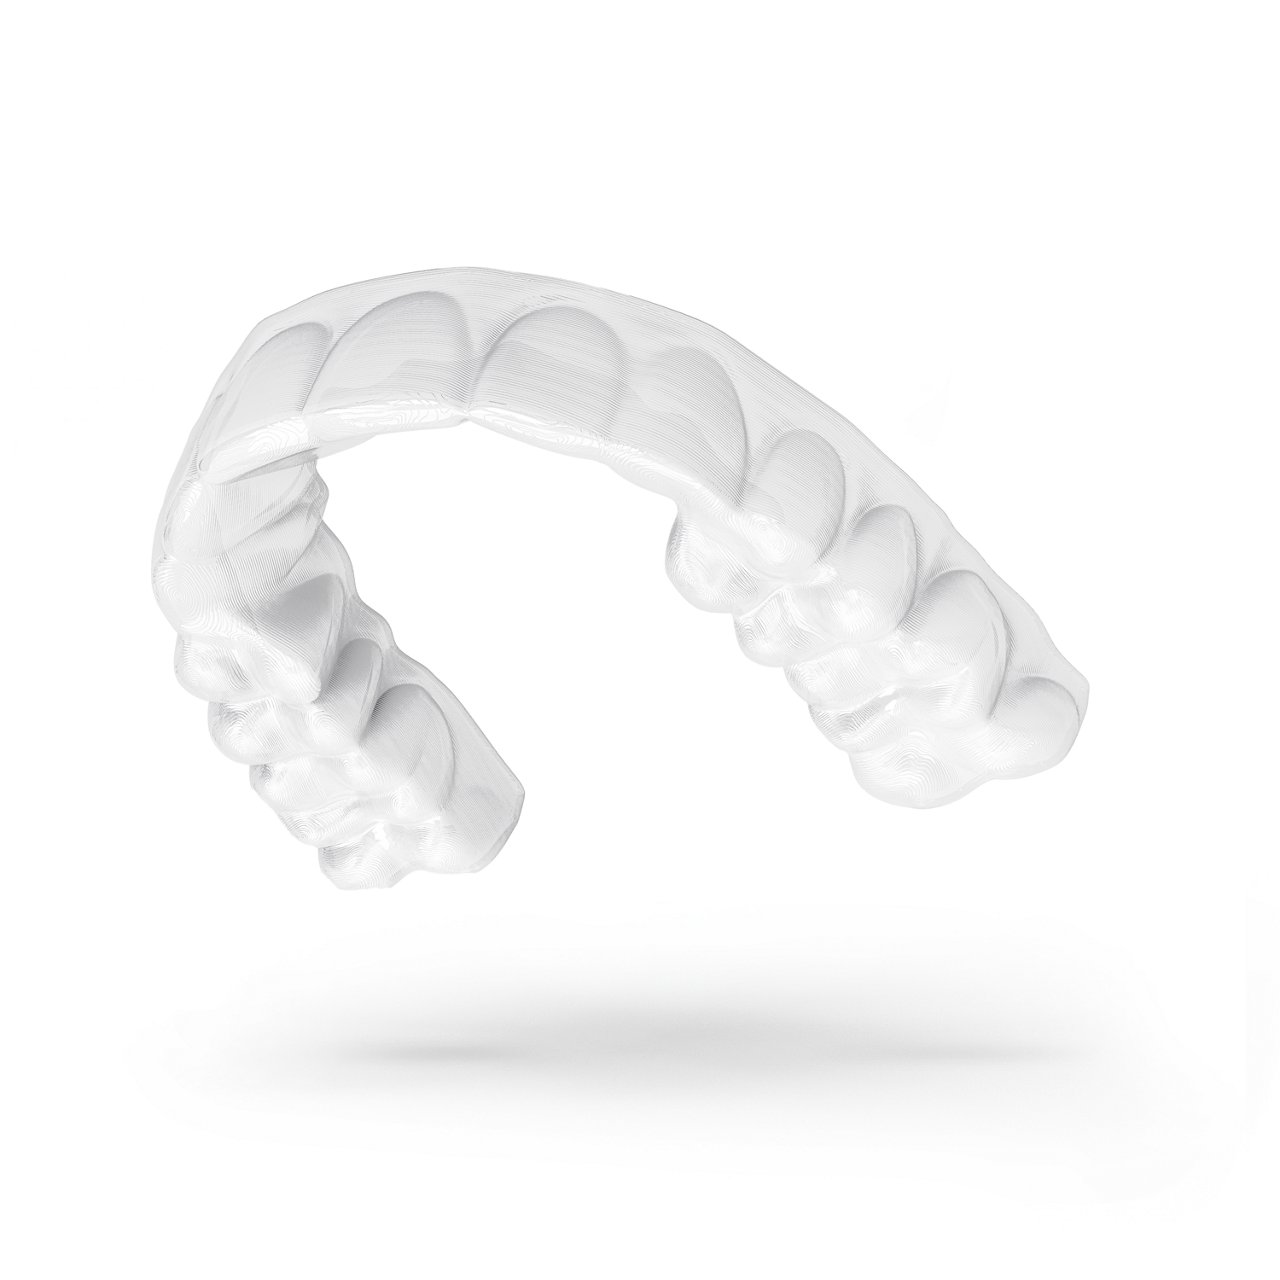 Rendered image of the 3M™ Clarity™ Aligner